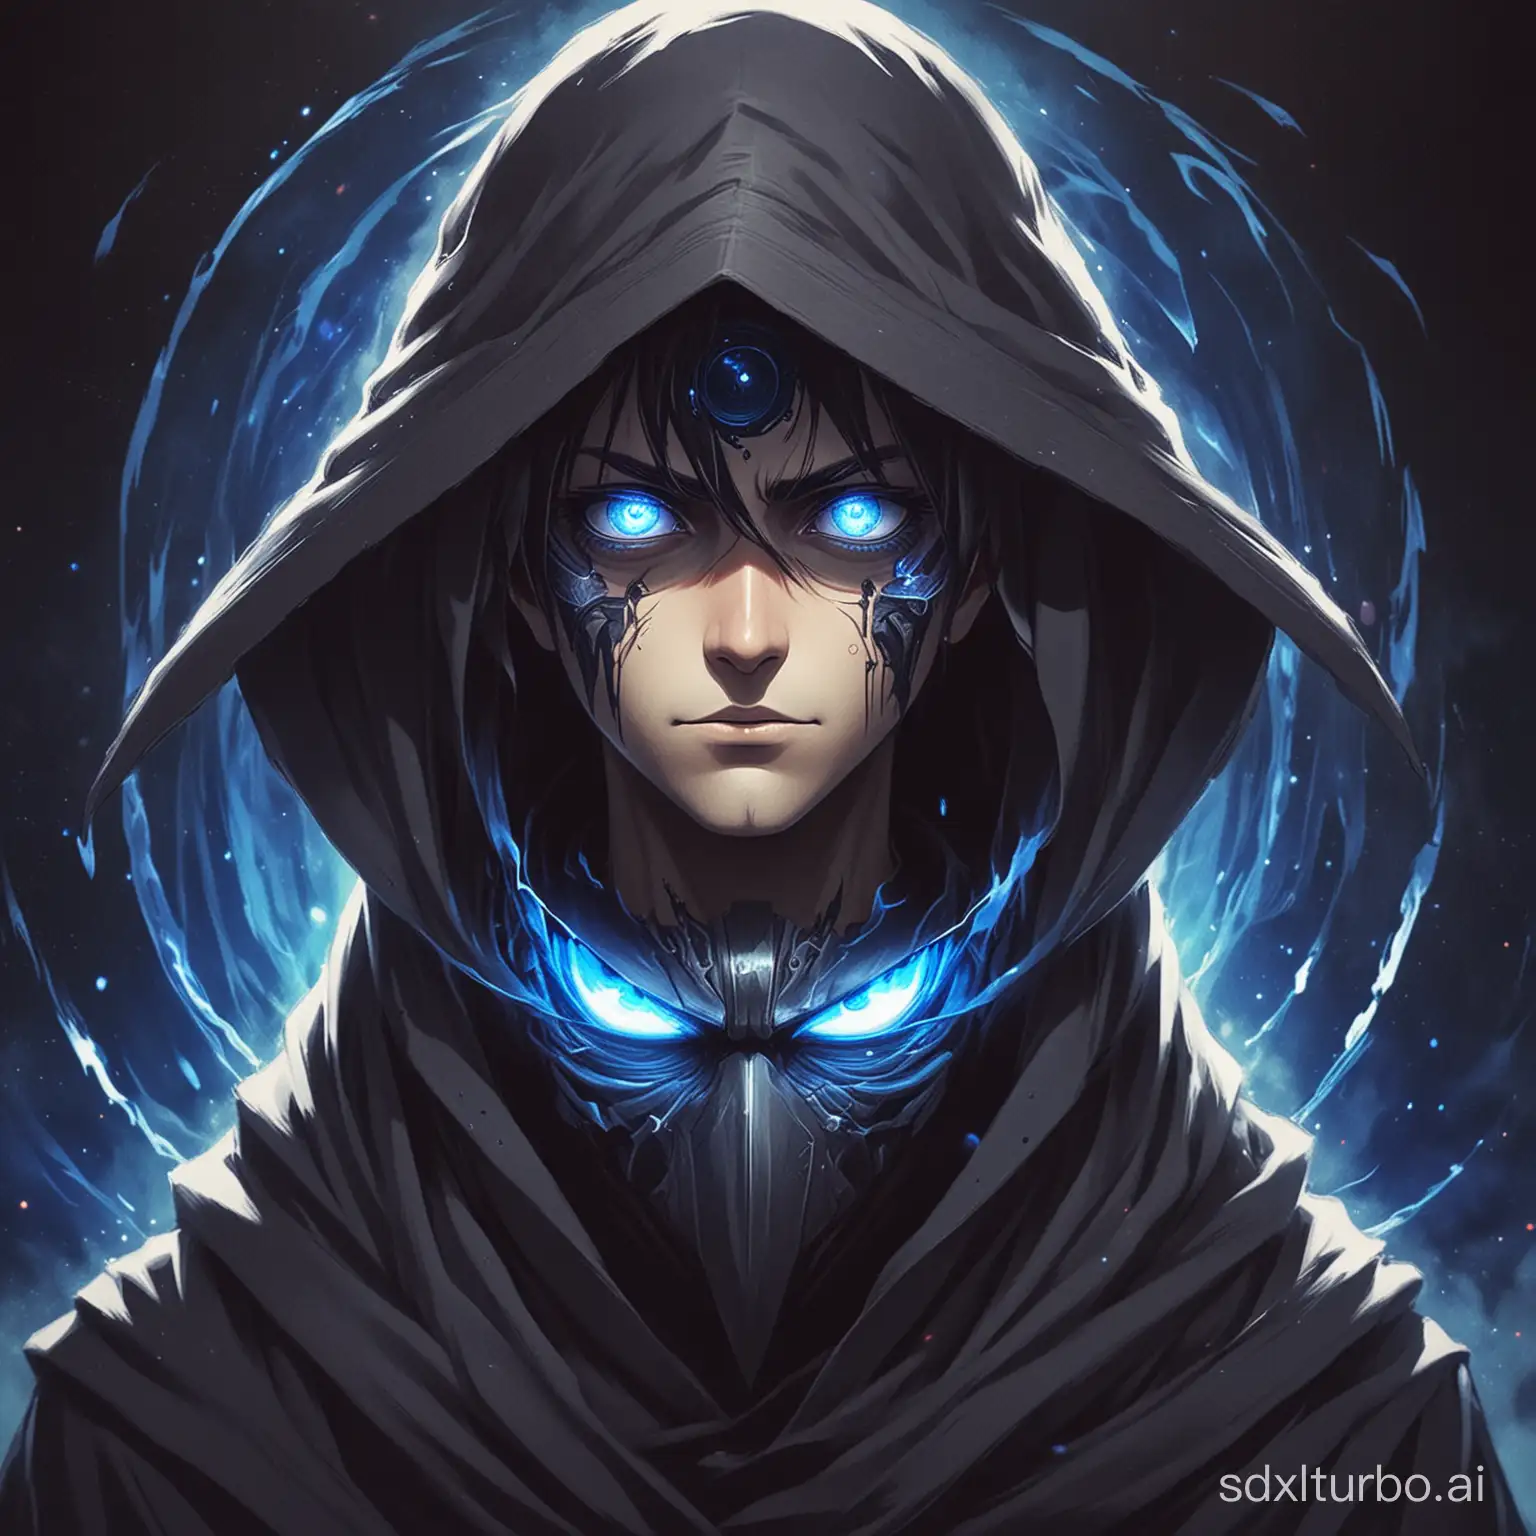 anime reaper guy with Rinnegan eyes and blue magic hat